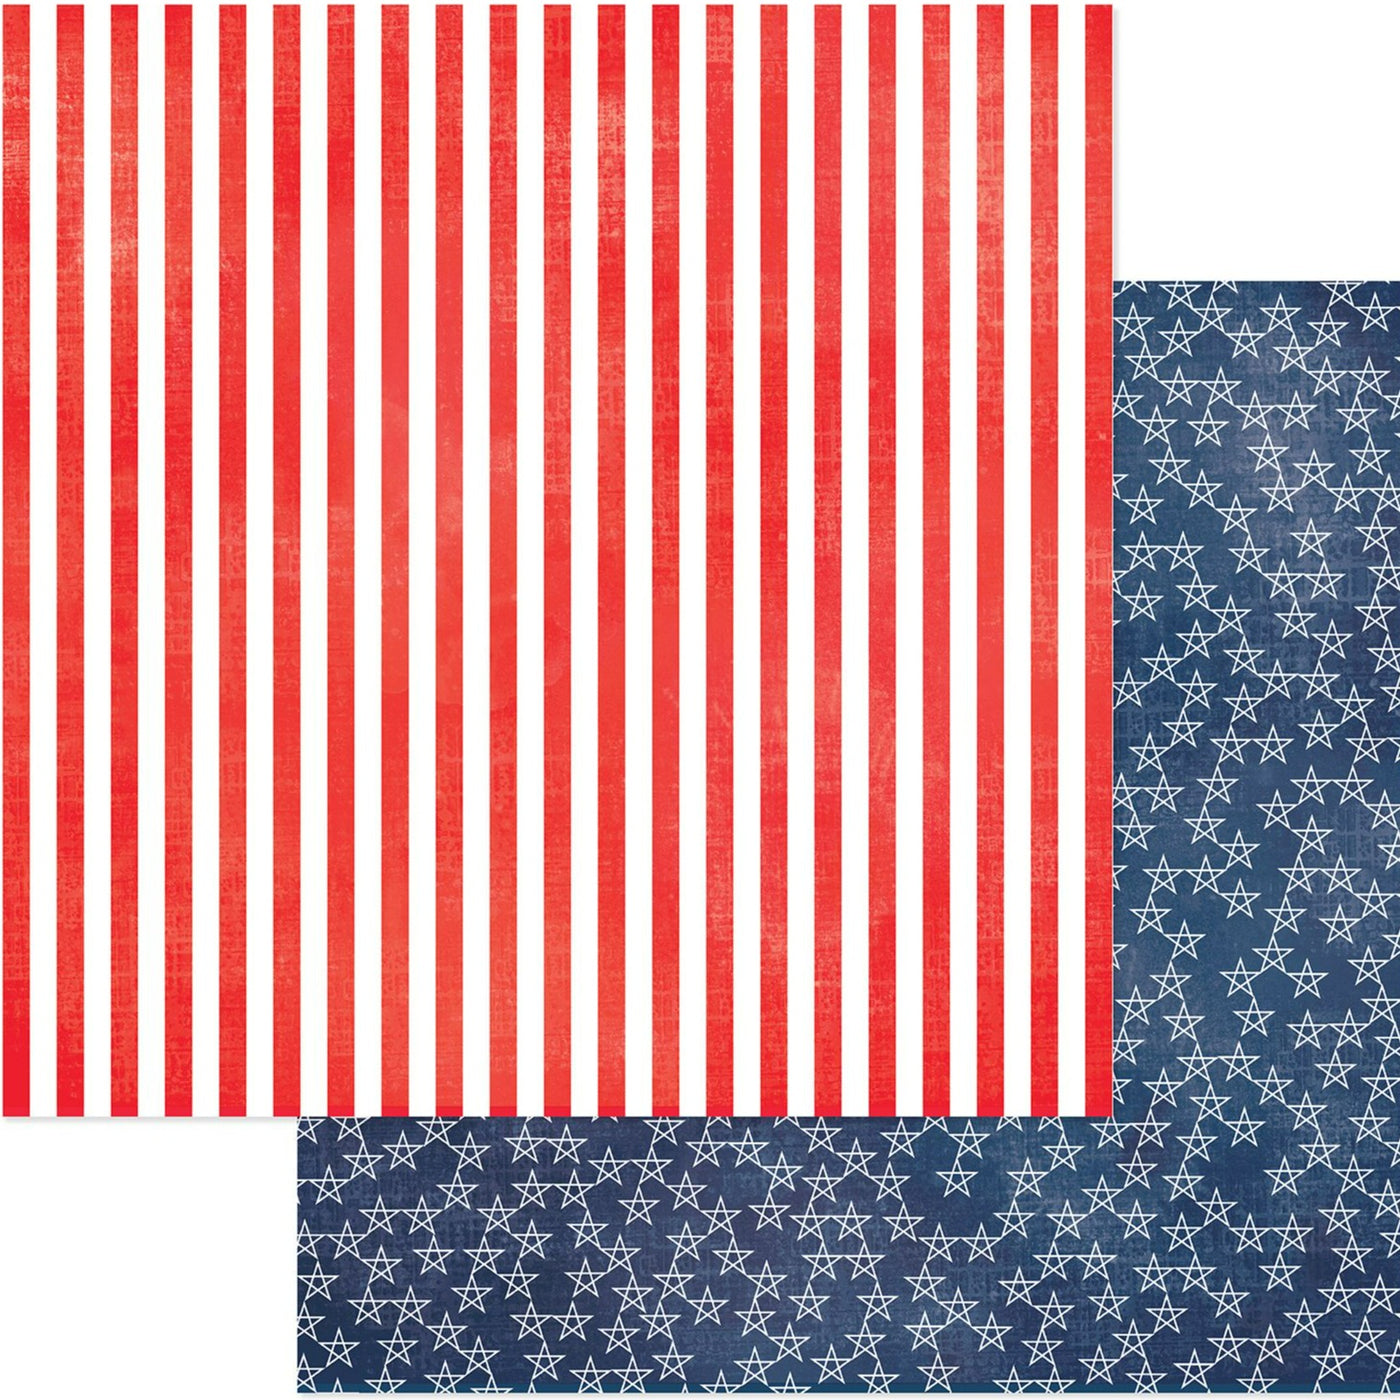 12x12 double-sided patterned paper. (Side A - red stripes on a white background, Side B - blue star pattern background) - American Crafts